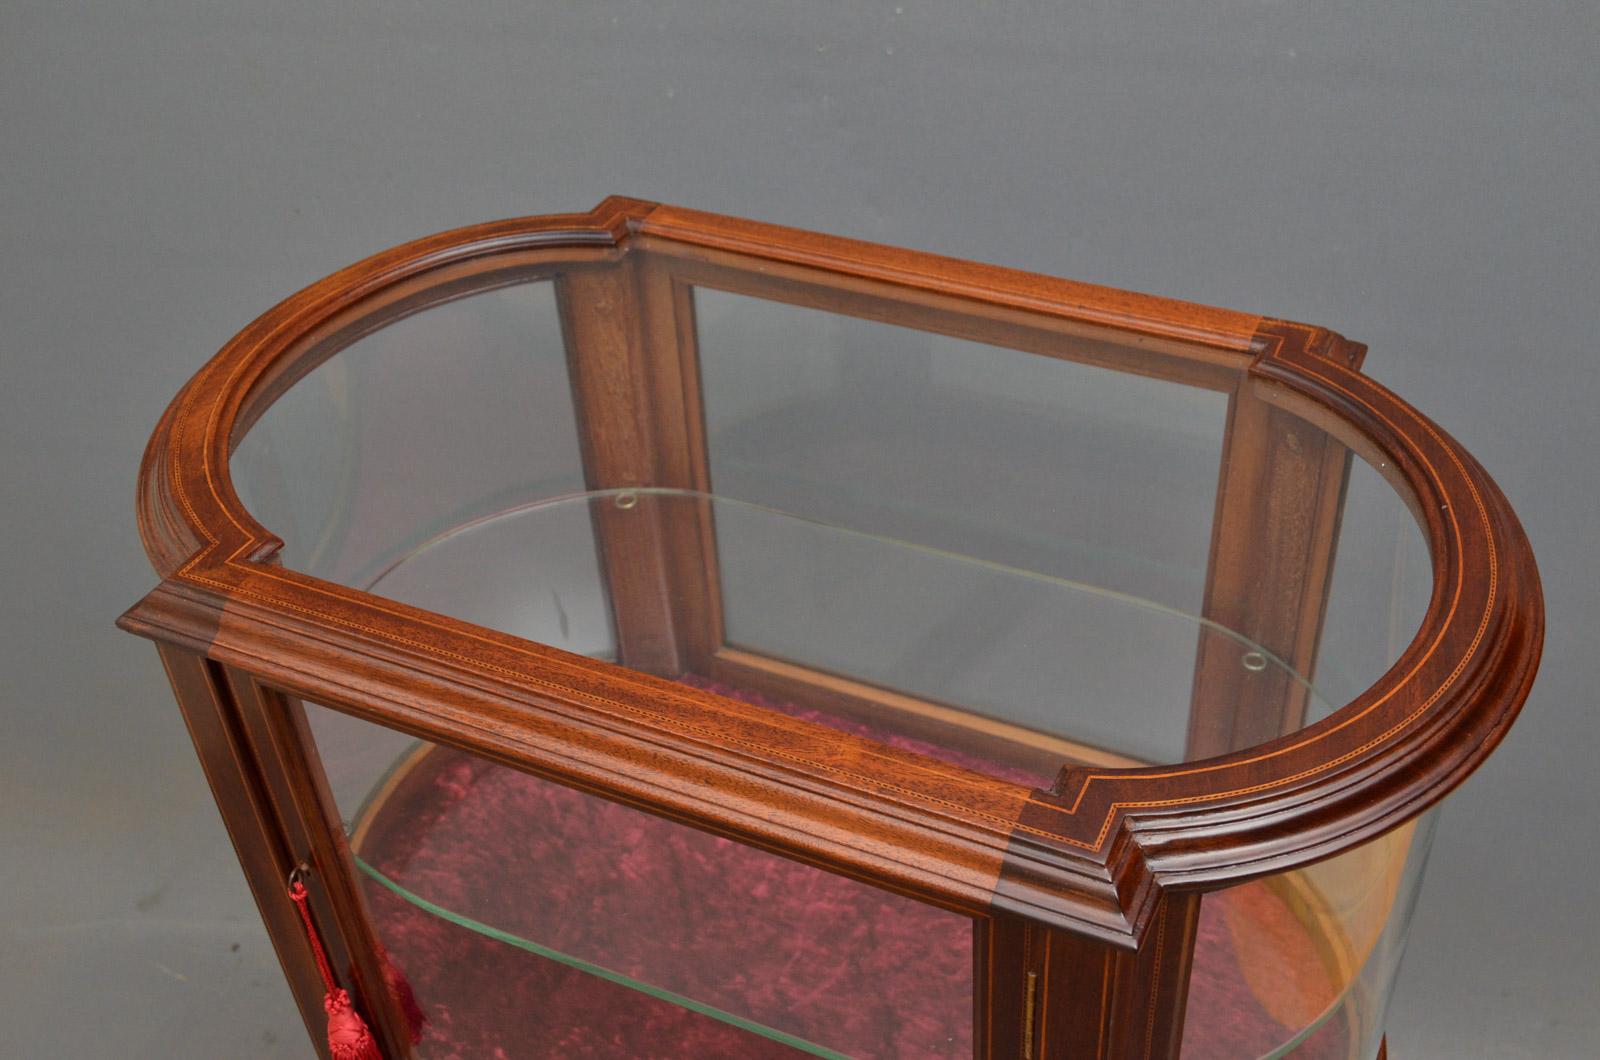 Sn4383, a fine example of Edwardian, mahogany display table of oval outline, having satinwood inlaid top and door enclosing glass shelf, standing on elegant, string inlaid legs terminating in spade feet, all in home ready condition, circa